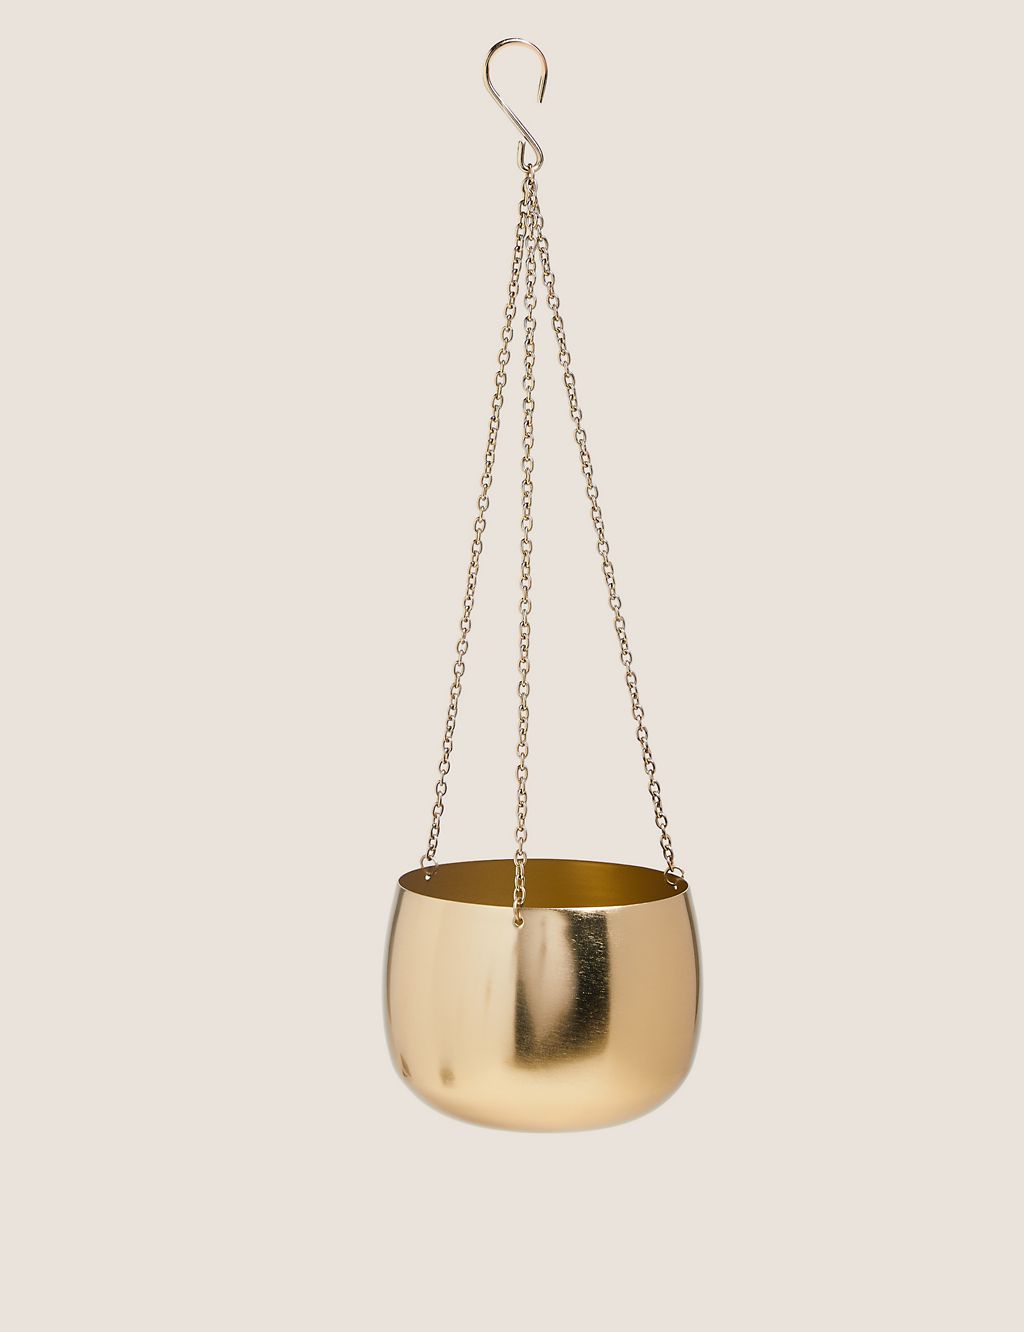 Hanging Small Gold Planter 1 of 6